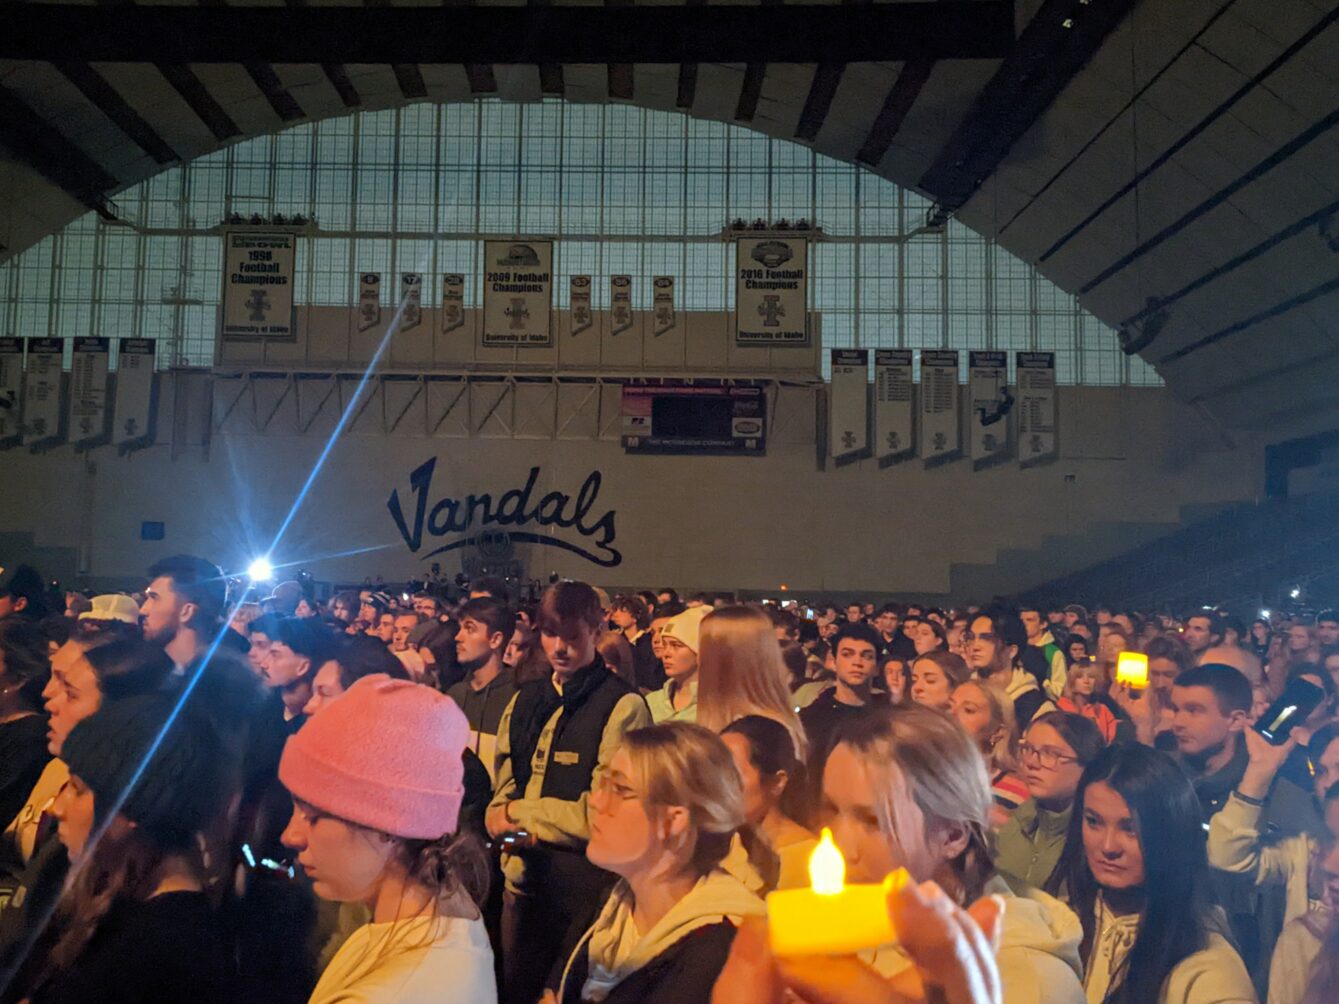 A crowd of hundreds of students hold up lights inside the Kibbie Dome with 'Vandals' written on the wall in black font in the distance.